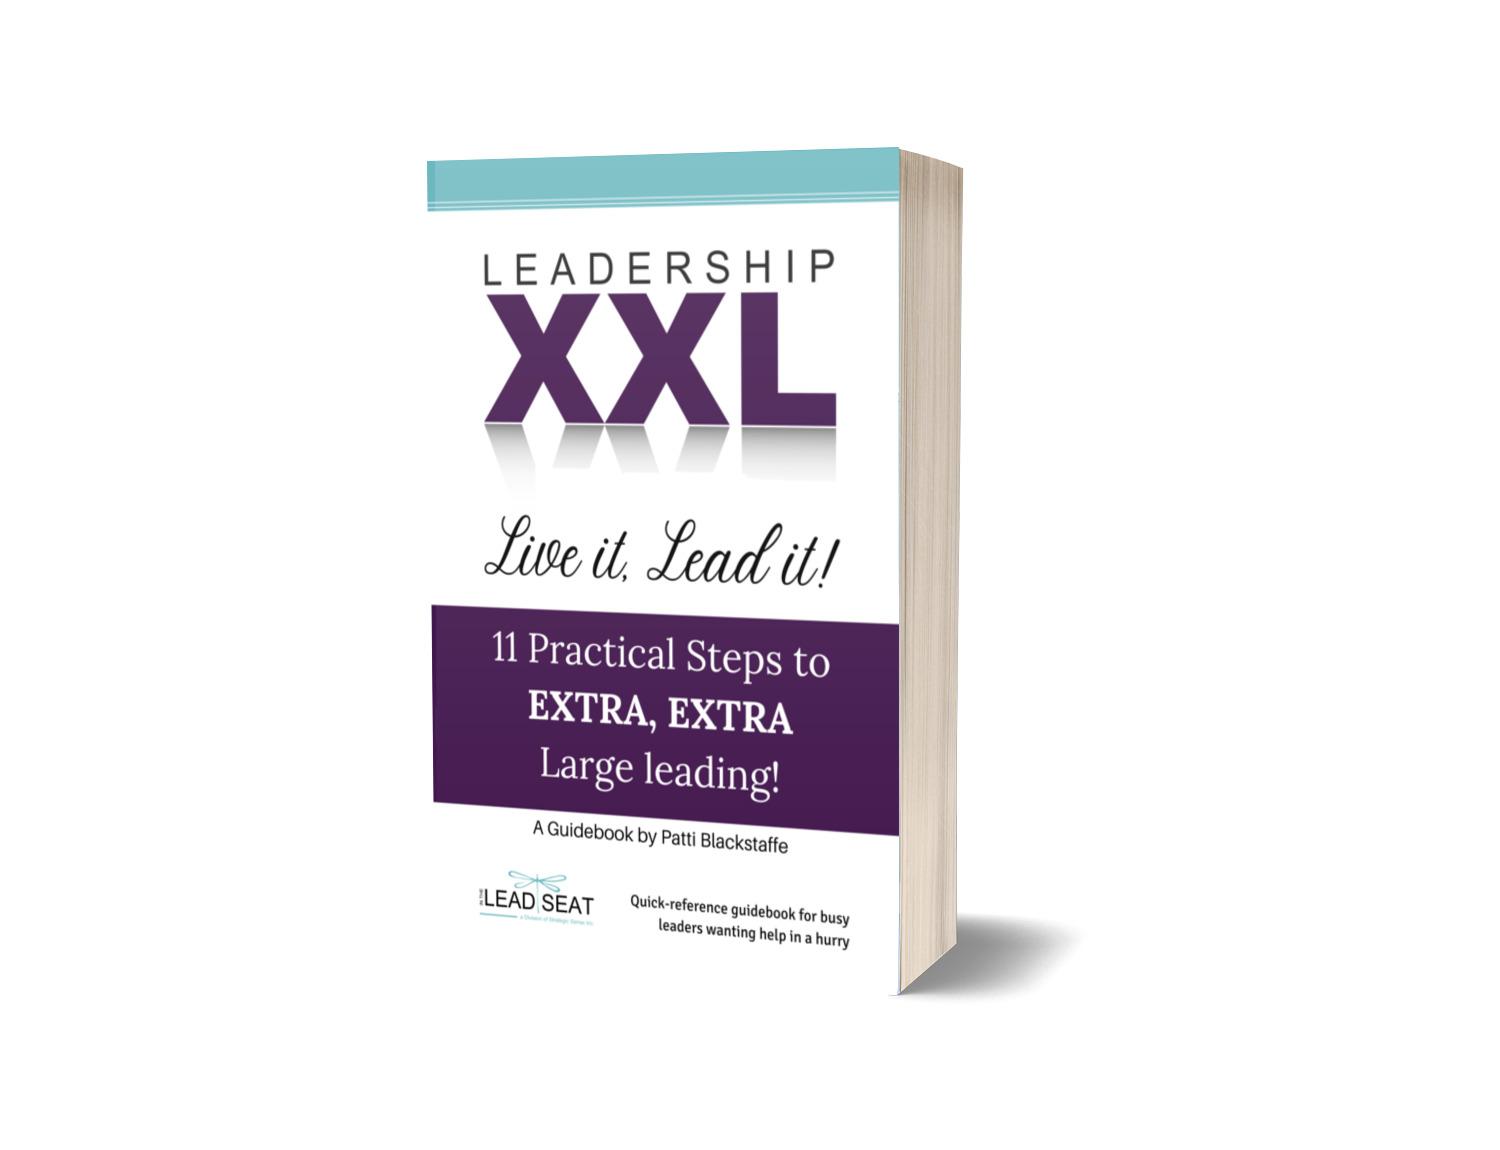 Book: Leadership XXL A Practical Guidebook for Leaders. Author Patti Blackstaffe of Global Sway. Book is purple, teal, and white.